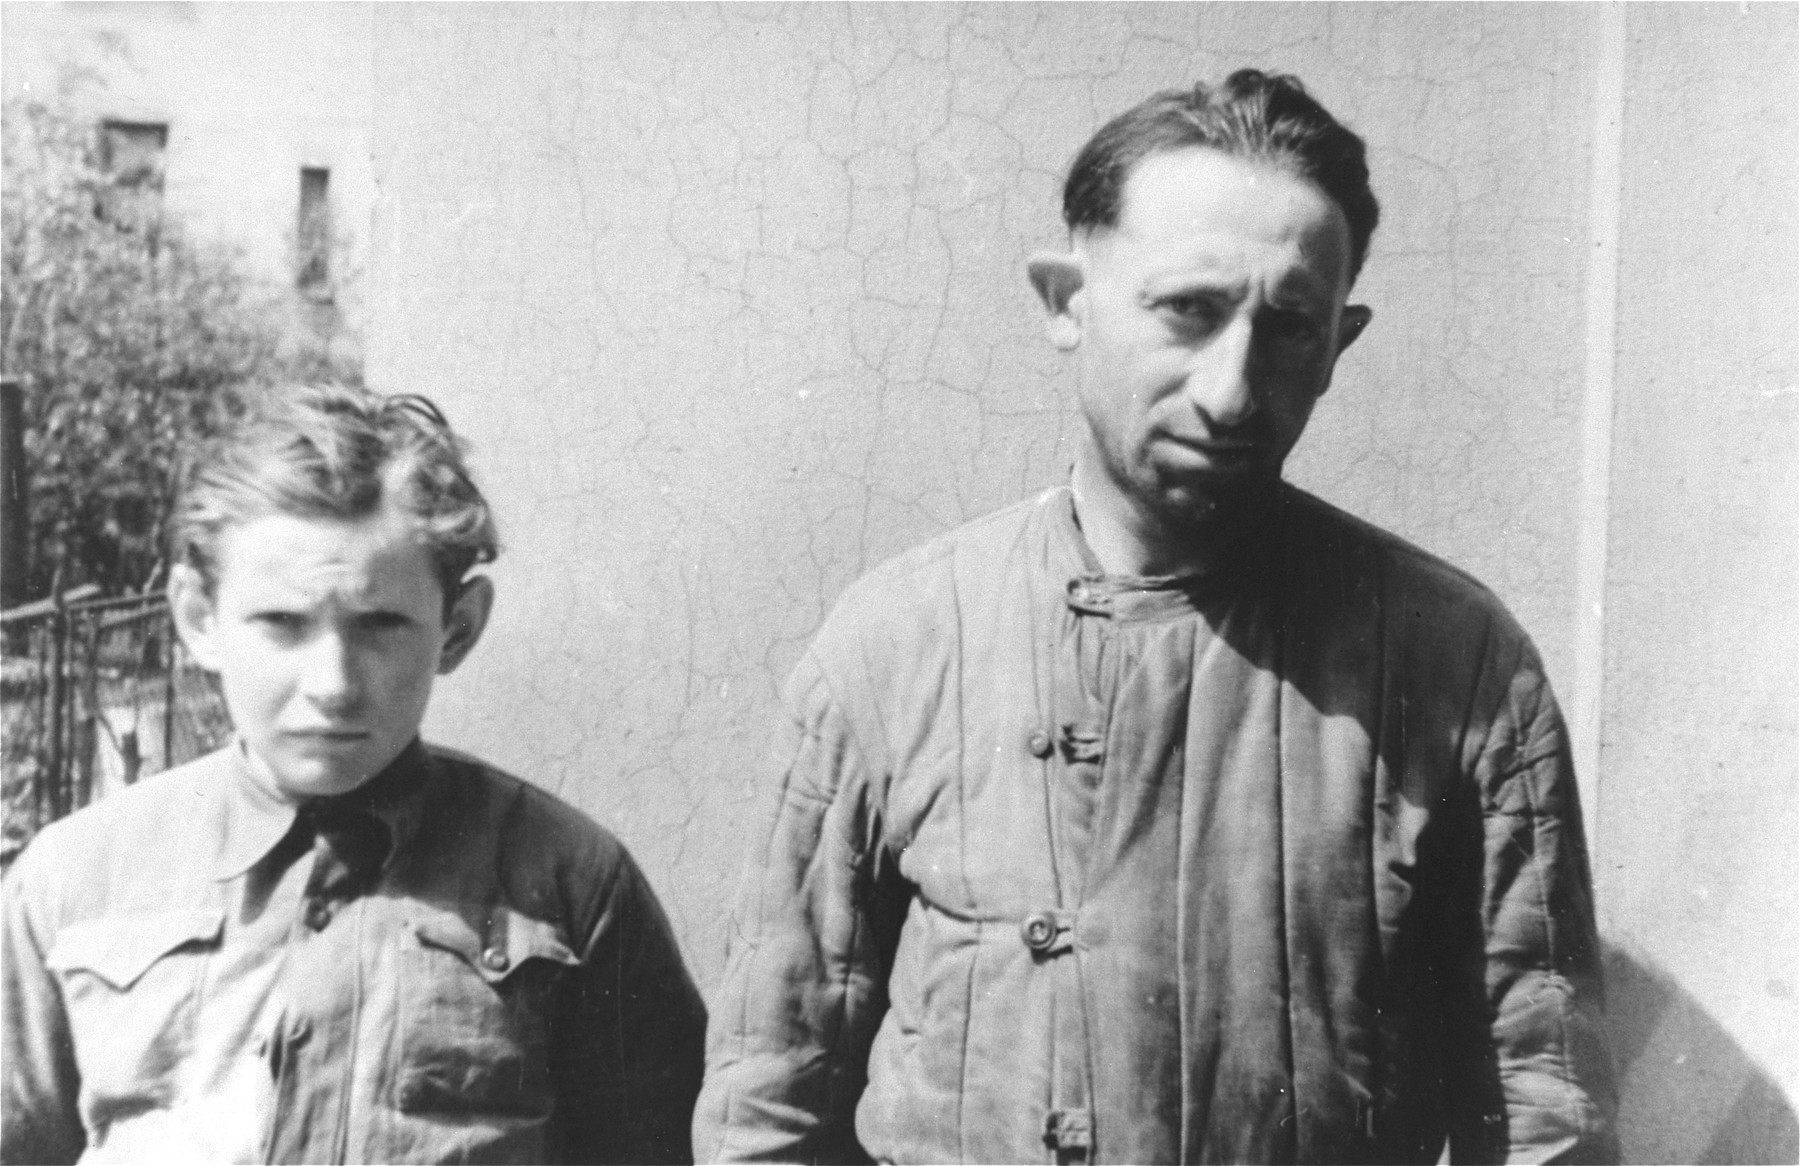 Lyba Leibowicz (right) poses with Jozek Hodor (left) in Rzeszow.

Lyba Leibowicz was a Jewish trapper who was a member of the partisan group that Naftali Saleschütz joined in the forests near Kolbuszowa.  Jozek Hodor was the son of Jan Hodor, a Polish peasant who provided food for the Jewish partisans.